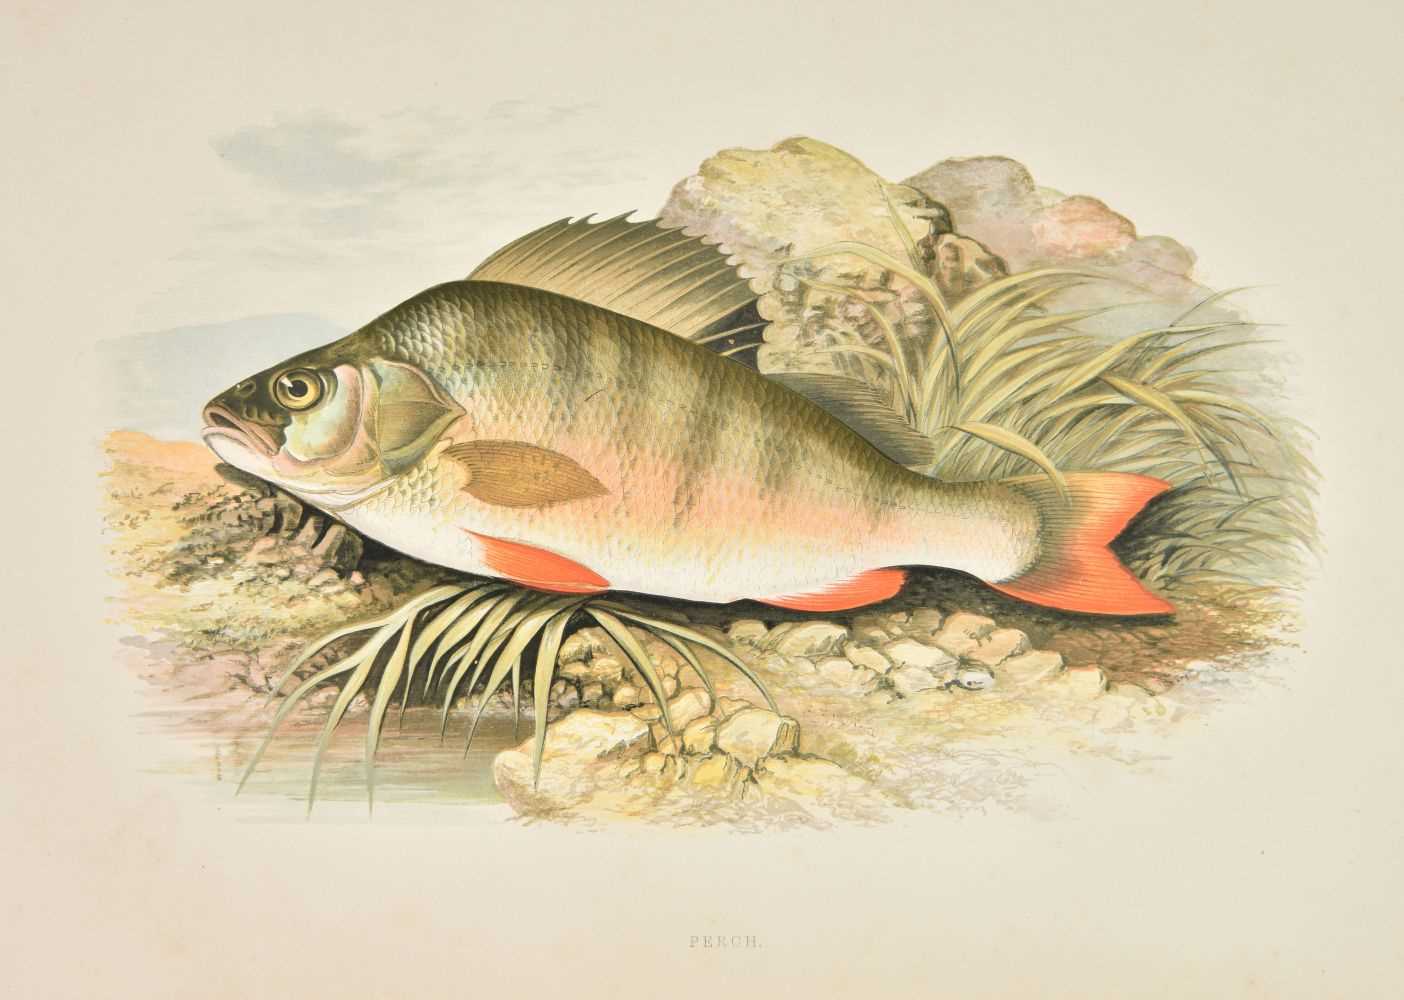 Lot 125 - Houghton (William). British Fresh-Water Fishes, 2 volumes, 1st edition, 1879